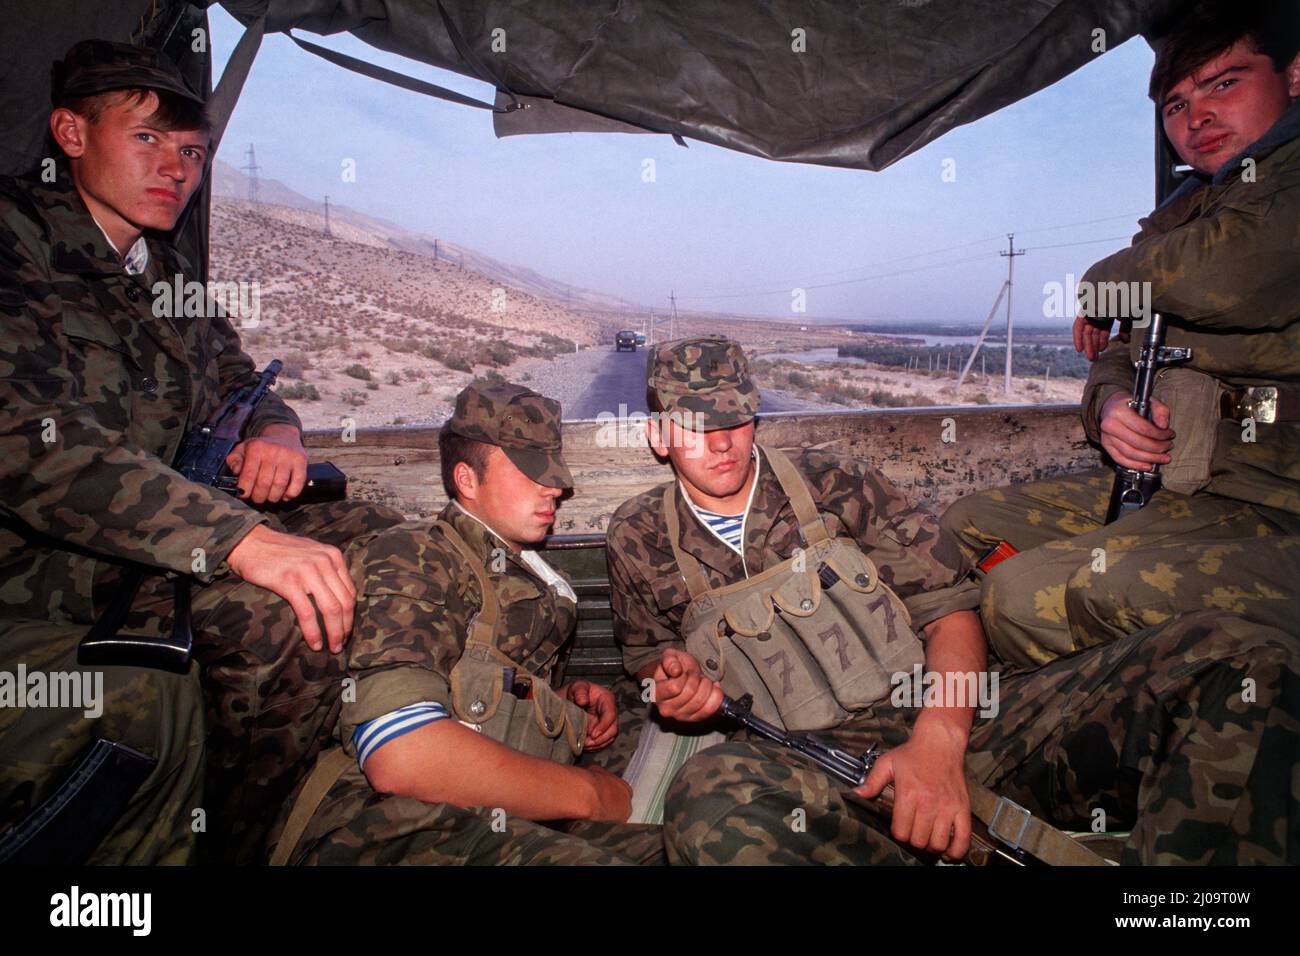 Tajikistan Civil War 1992-97, September 1992. Young Russian soldiers riding in the back of a military vehicle as part of a Russian convoy from Dushanbe (Tajikistan capital) to the southern khatlon region, on the Afghanistan border. Stock Photo